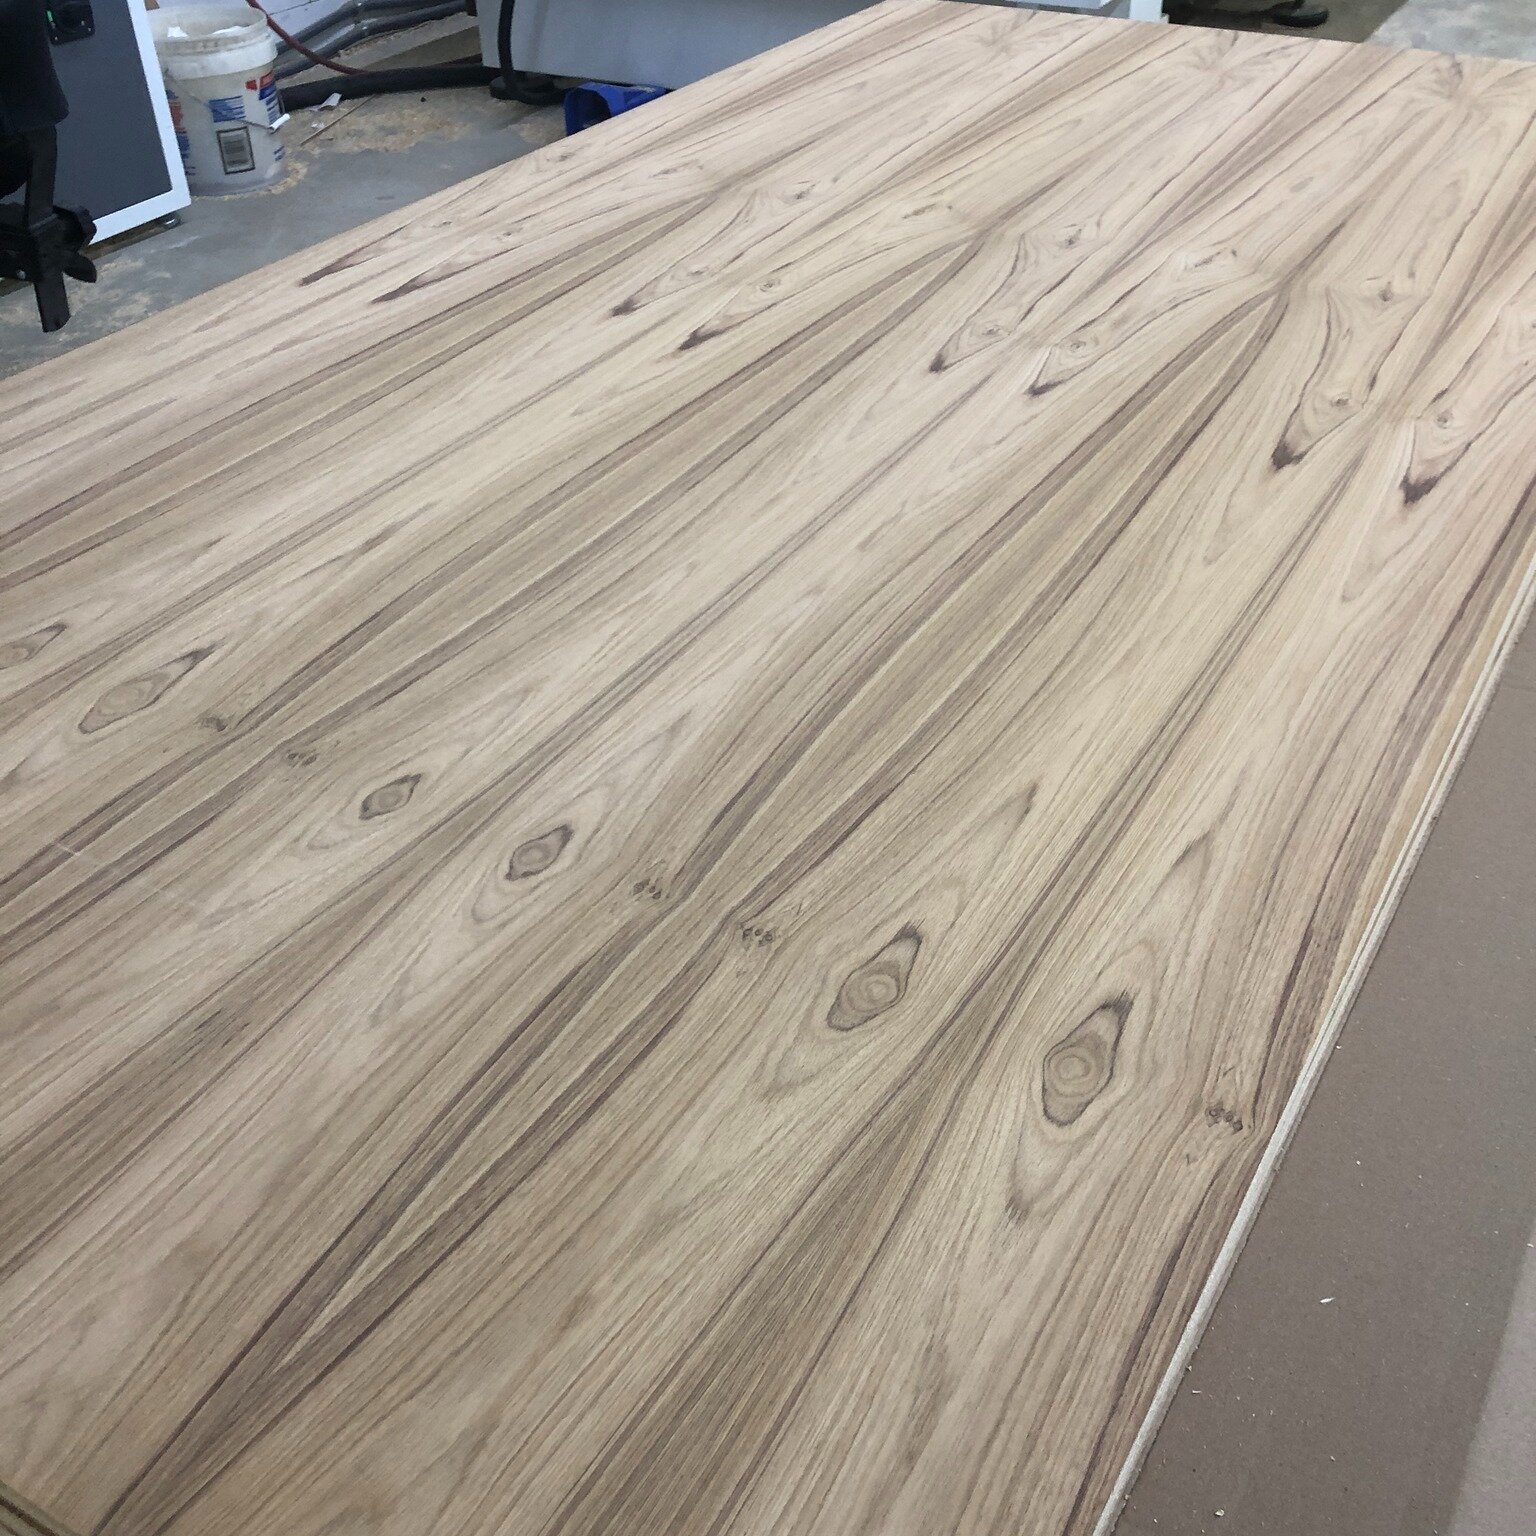 We wanted to share this beautiful teak wood we're very excited to be working with! 😁

#mtjuliettn #mtjuliet #nashvilletn #cnc #cncwood #cncmachining #cncrouter #cncmachine #handmadegifts #laserprinterservice #laserprinter #handmade #laserprintermach